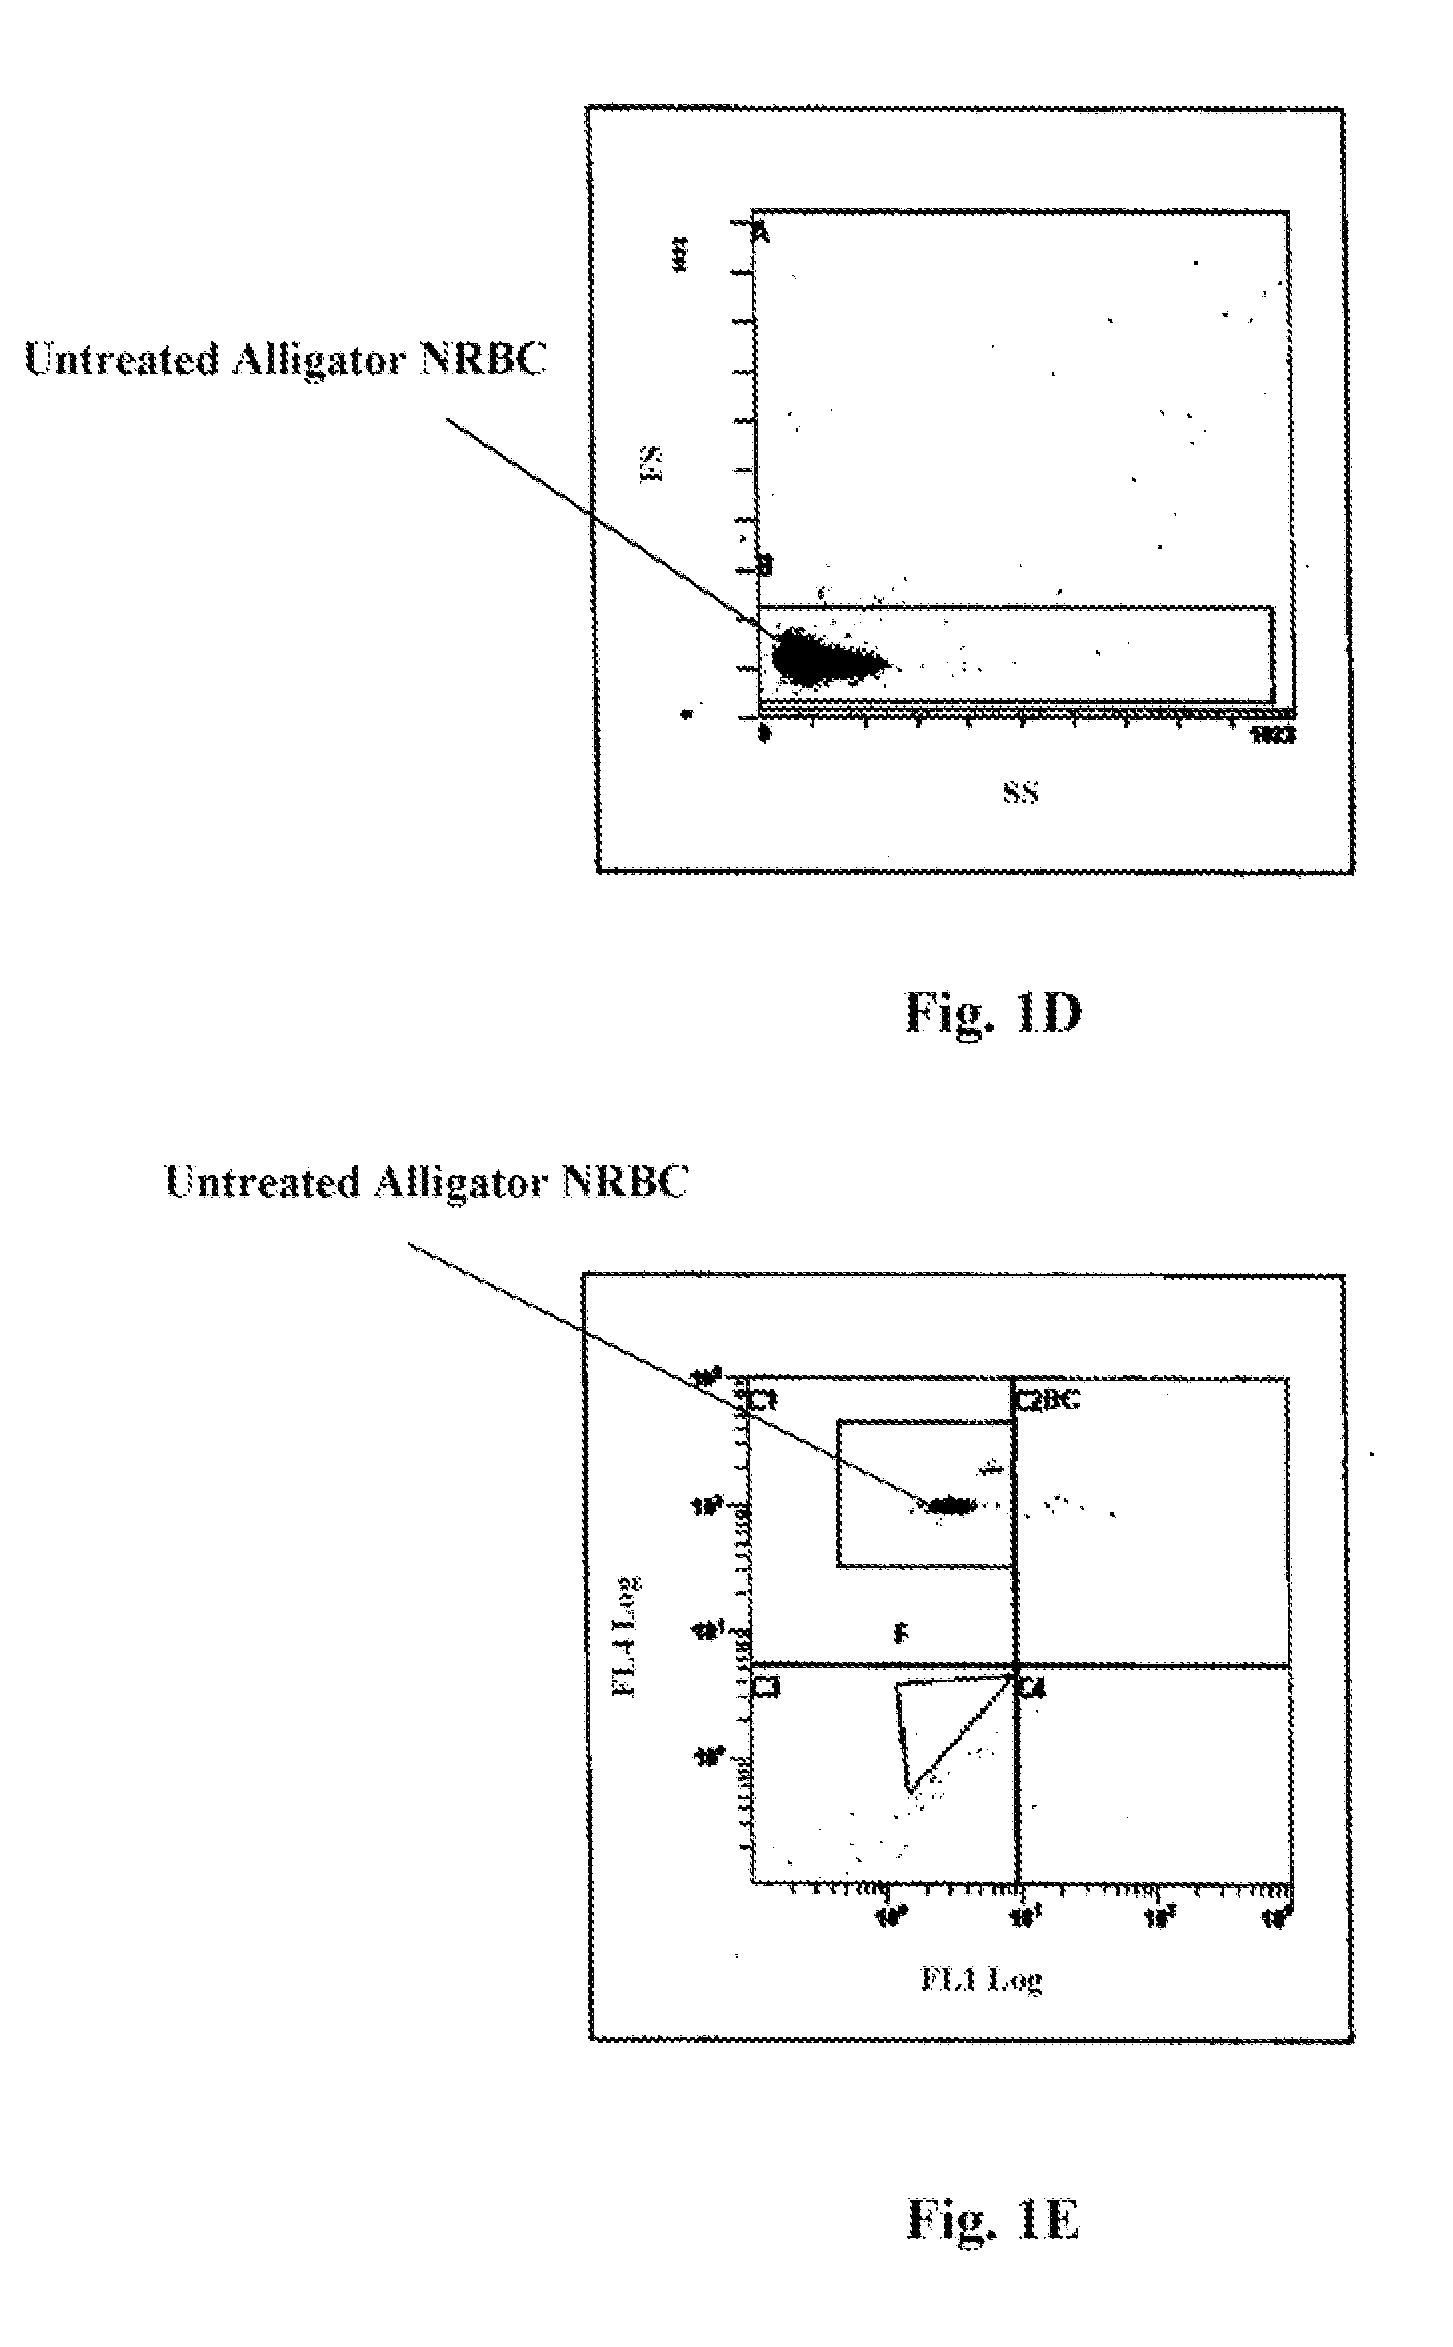 Reference Control Containing a Nucleated Red Blood Cell Component